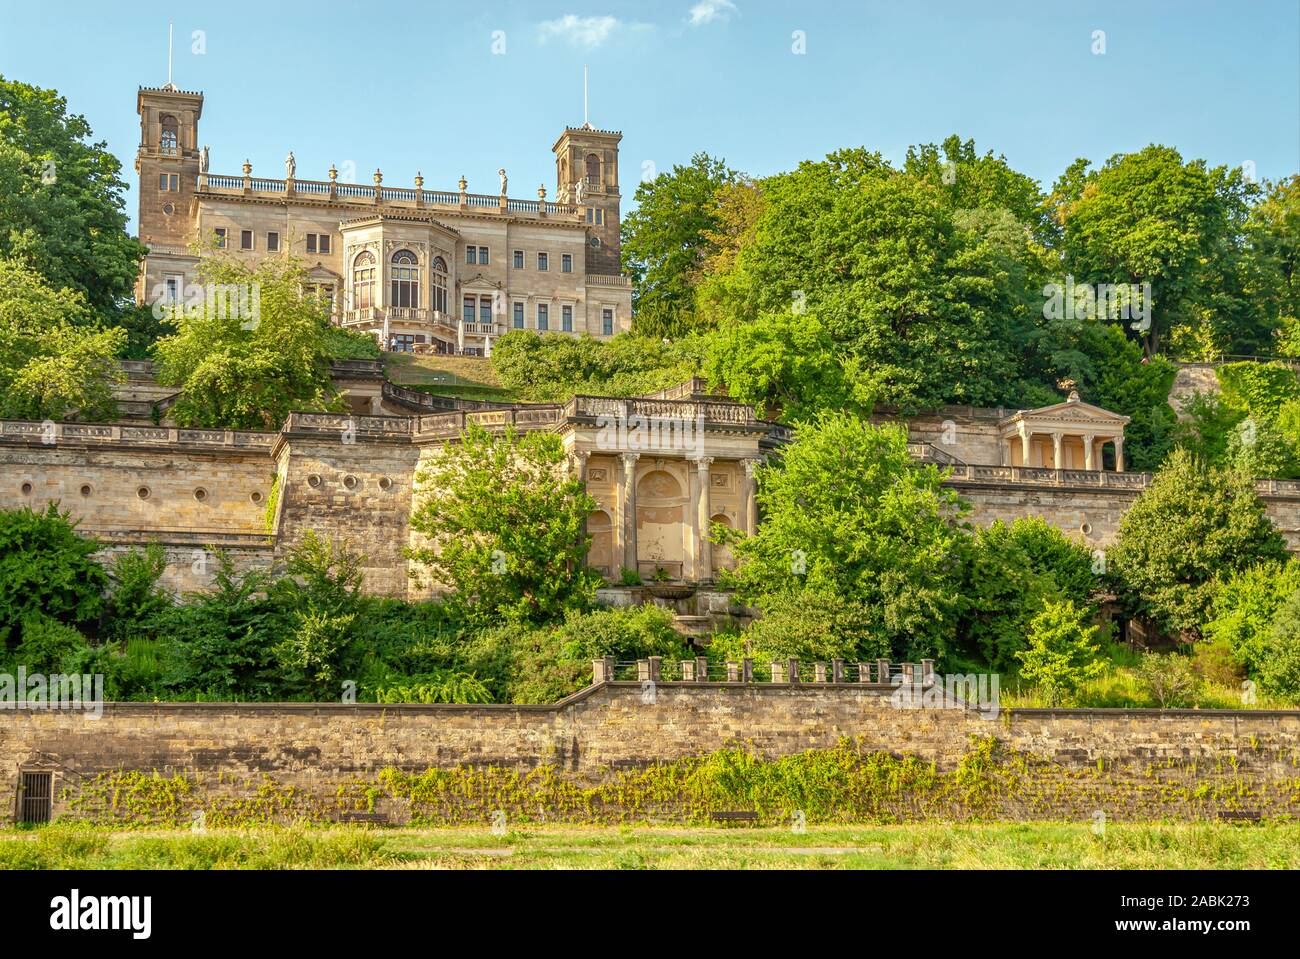 Schloss Albrechtsburg (castle) at the Dresden Elbe River Valley, Saxony, Germany Stock Photo